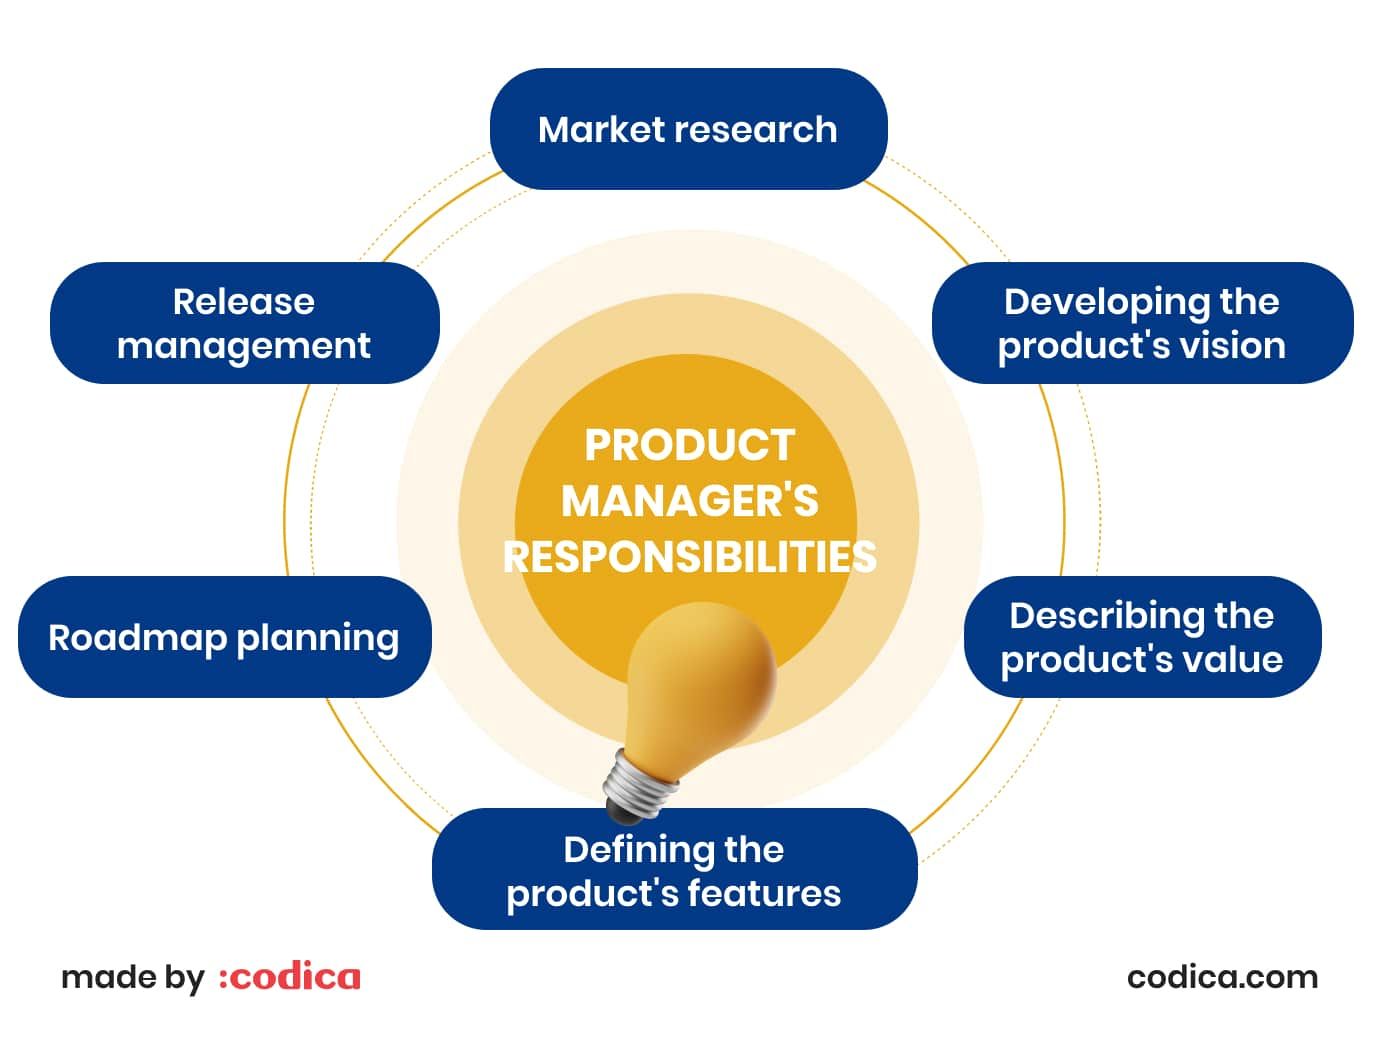 Product manager's duties